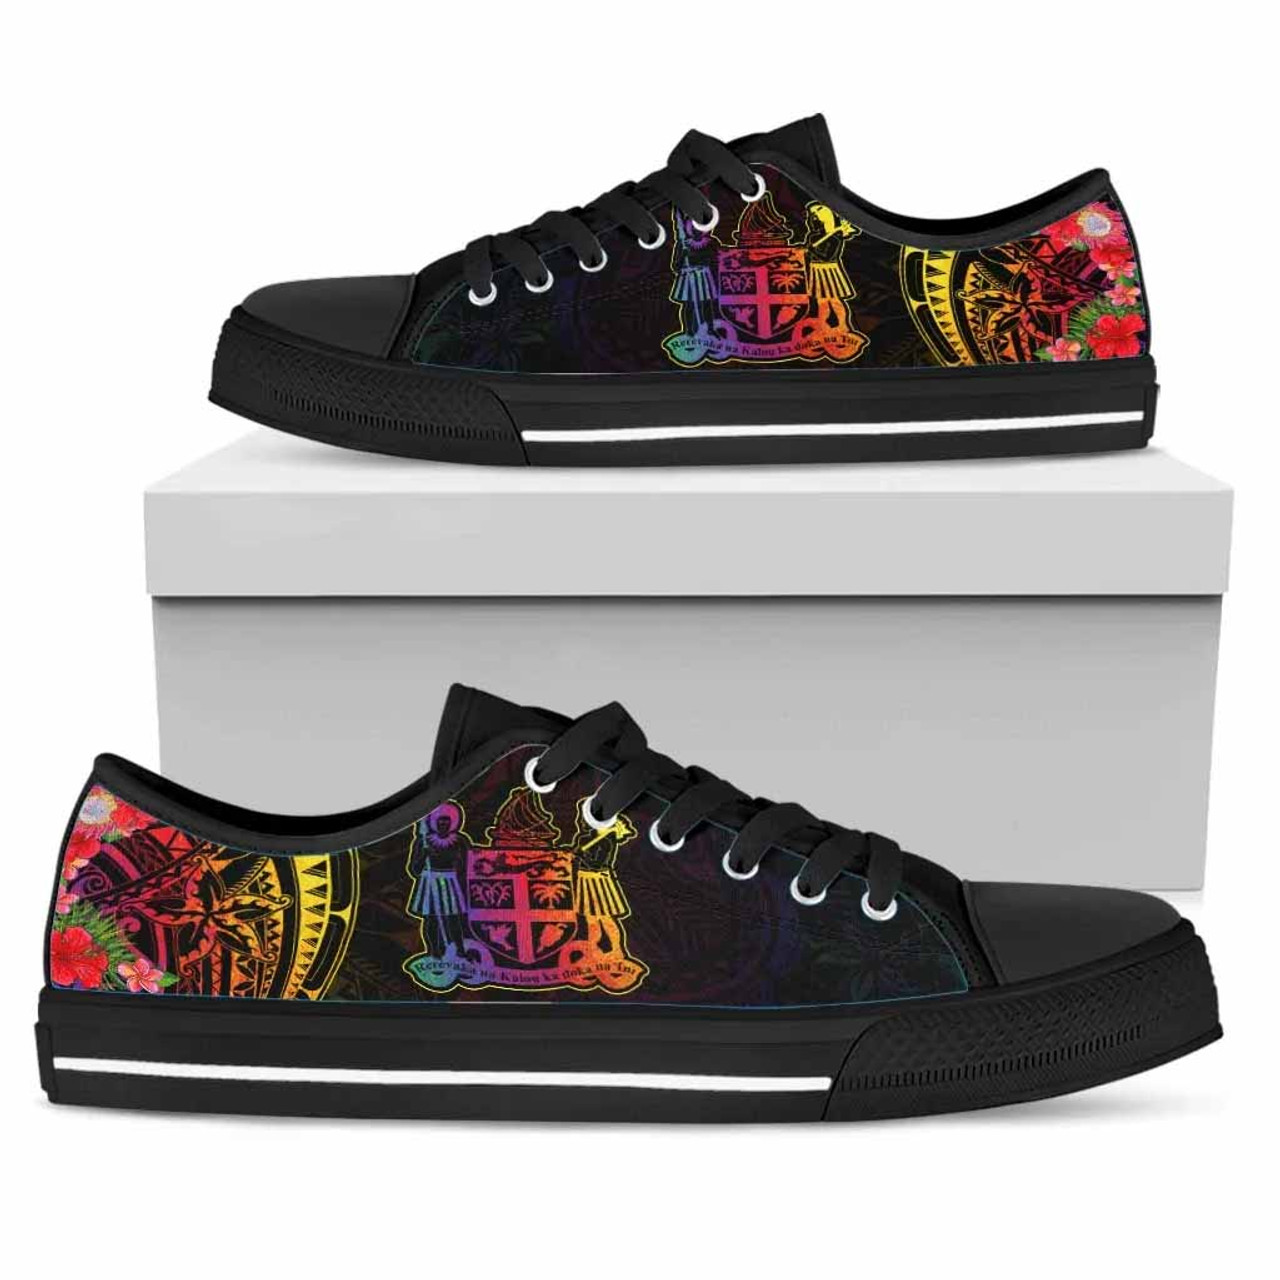 Fiji Low Top Shoes - Tropical Hippie Style 1